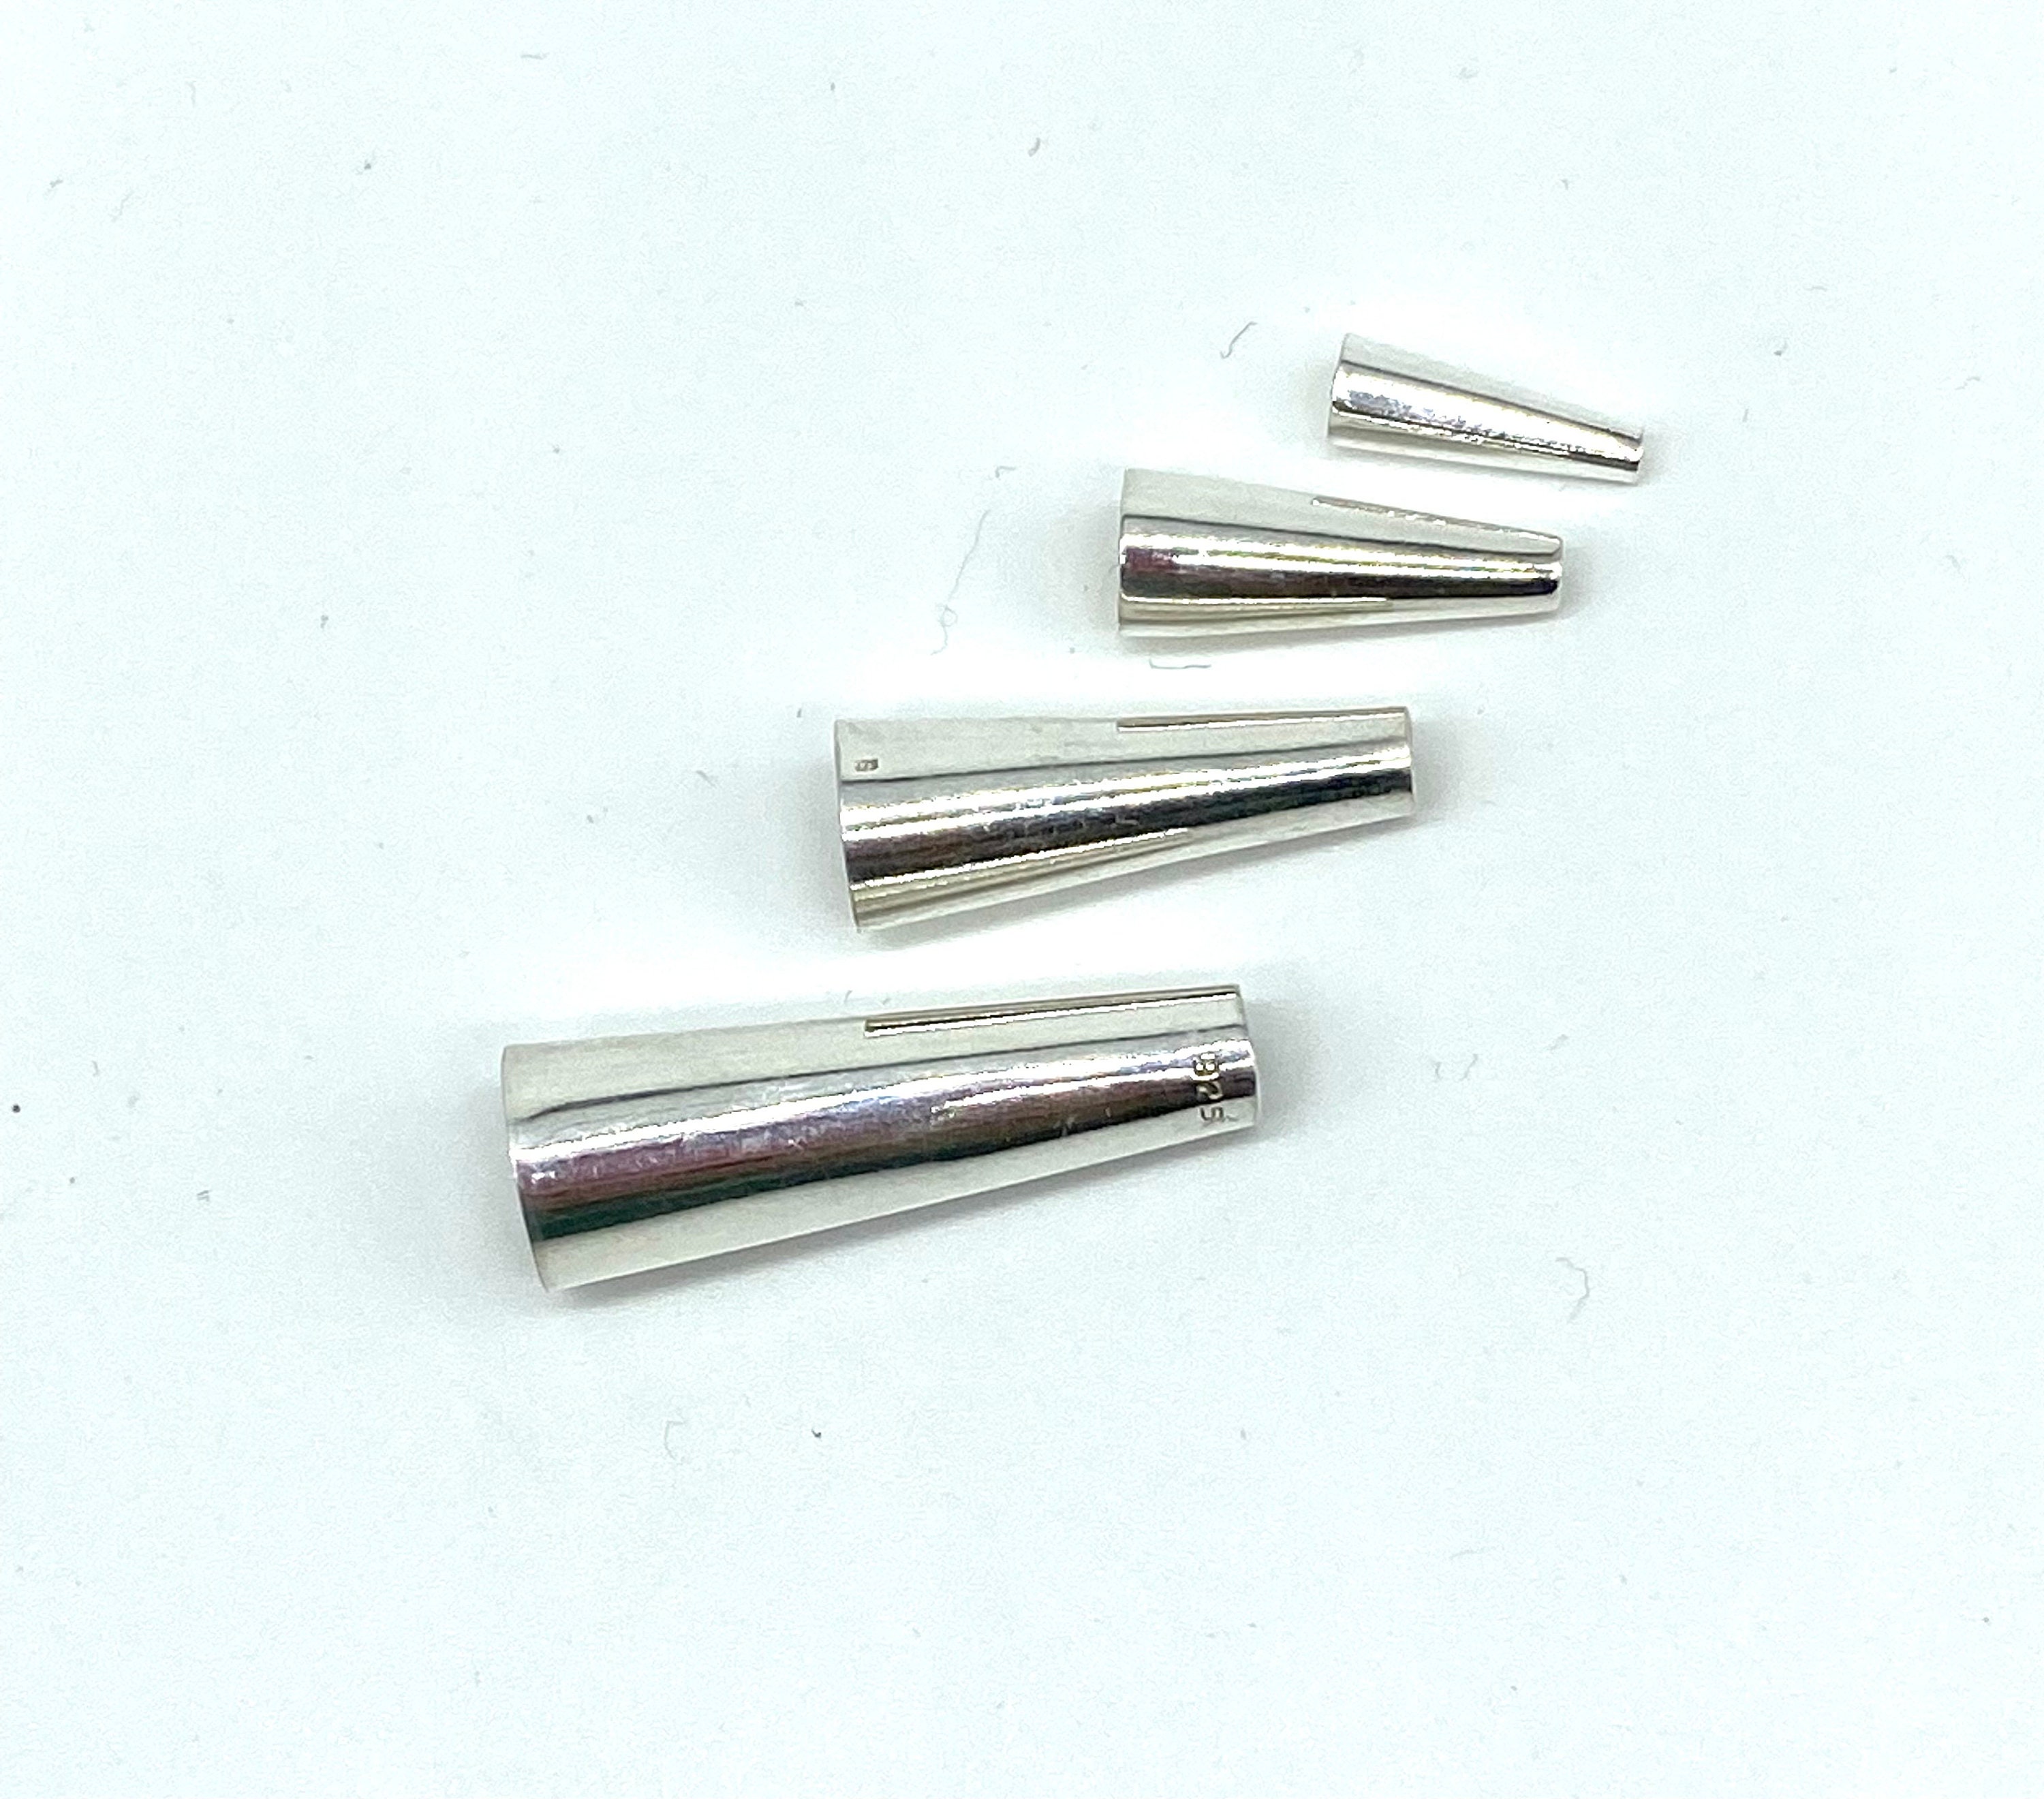 12 Packs: 23 Ct. (276 Total) Smooth Silver Bead Cones by Bead Landing